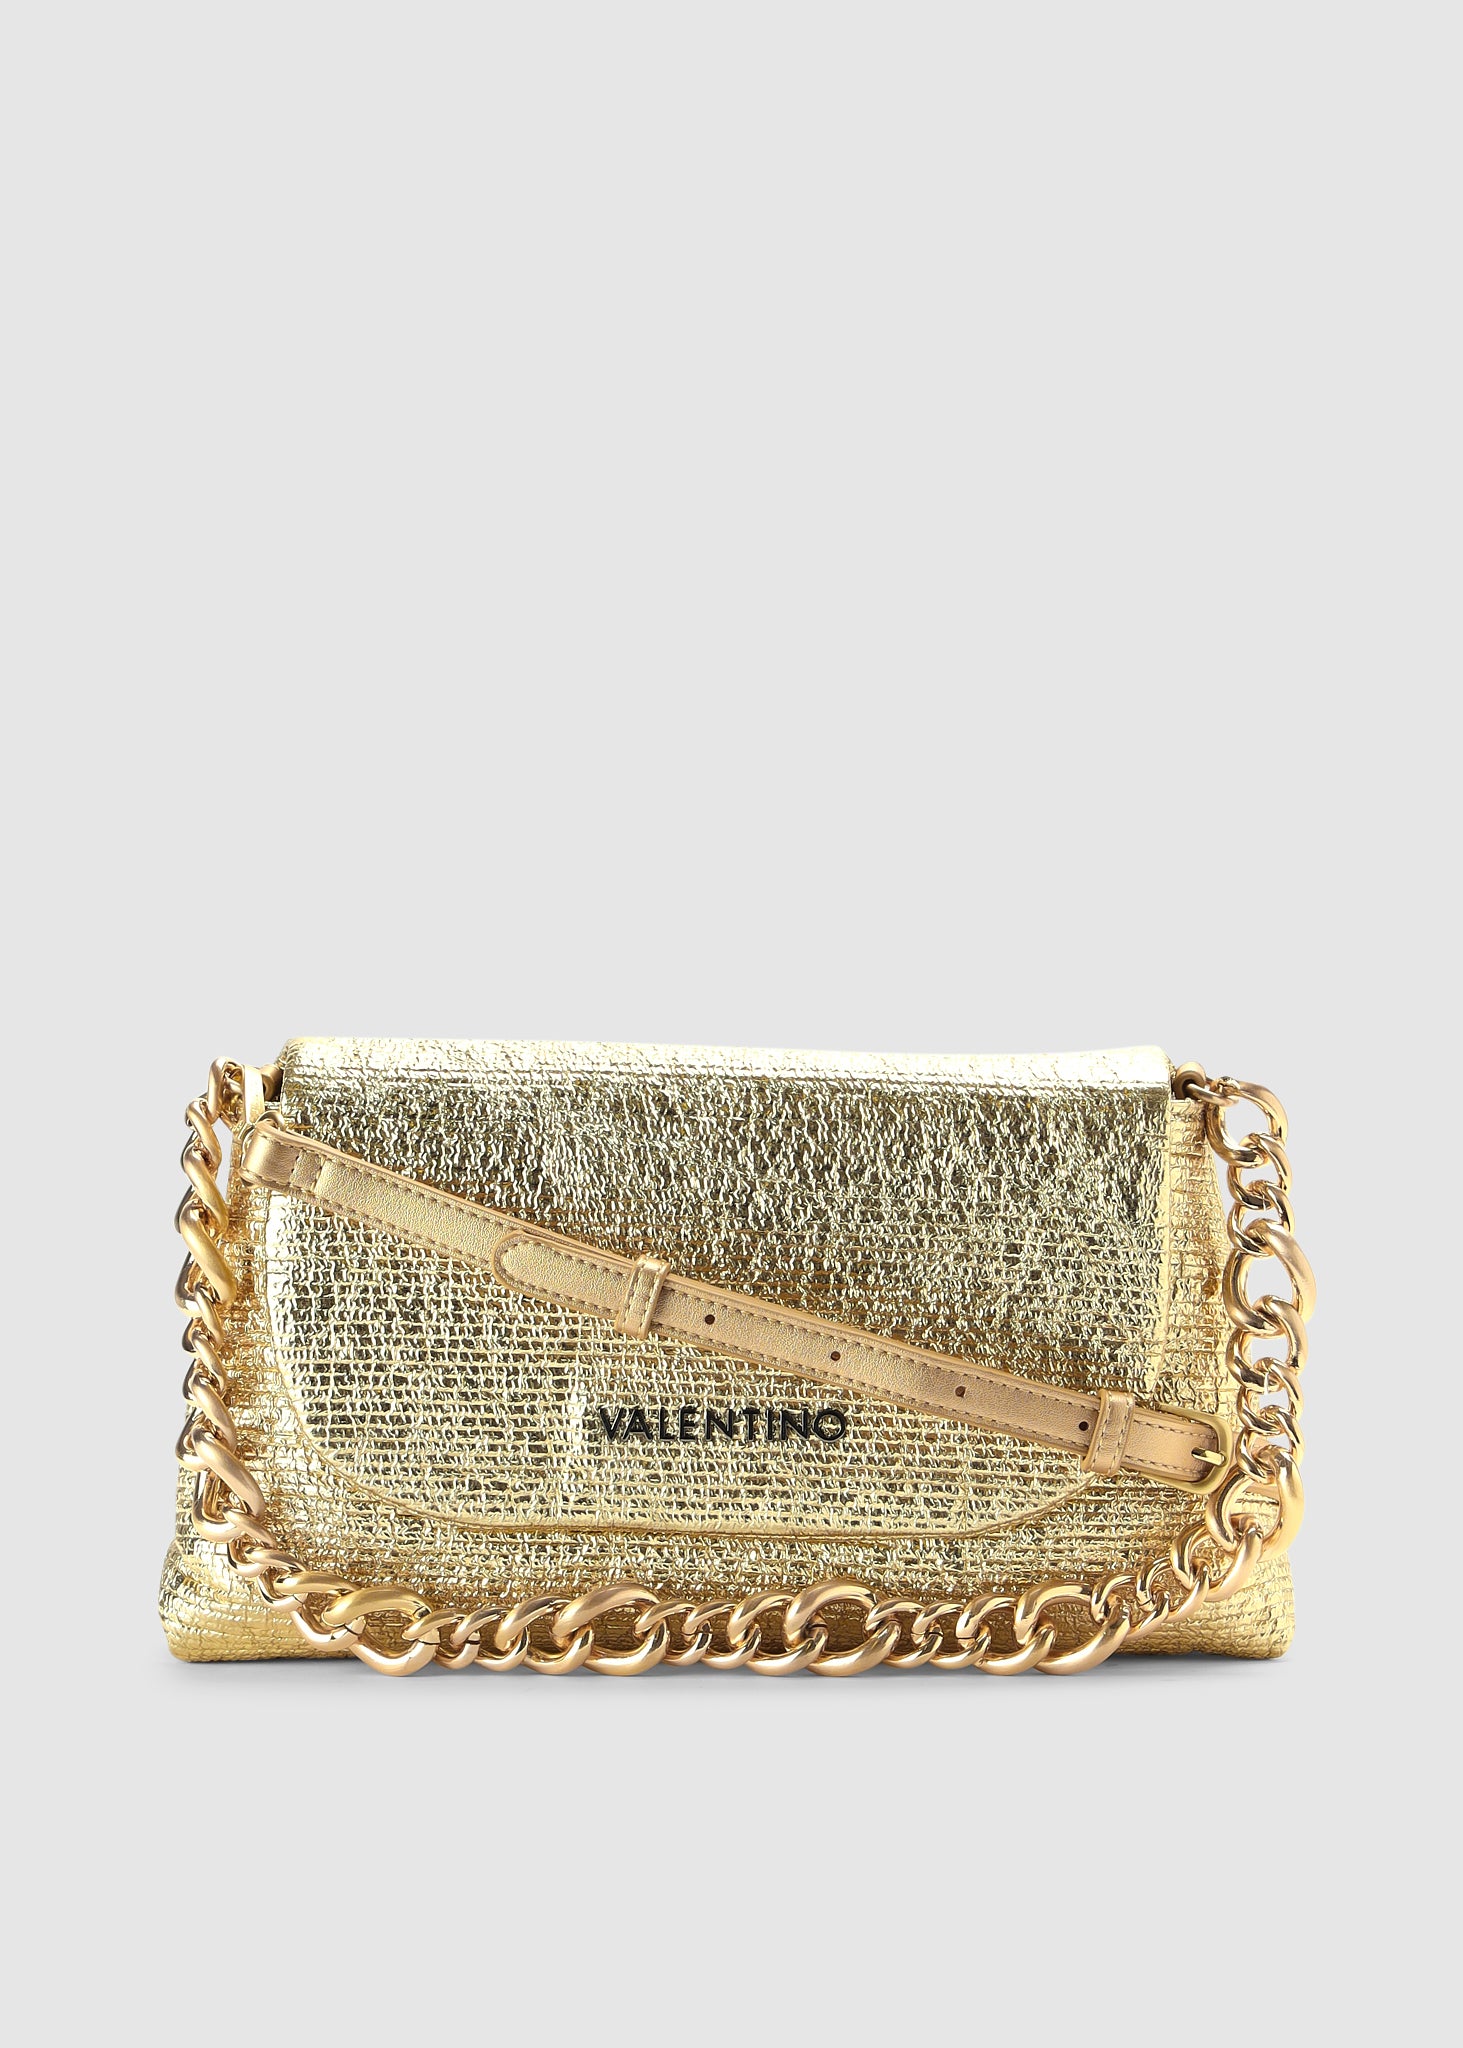 Valentino Bags Womens Friends Metallic Bag With Chain Strap